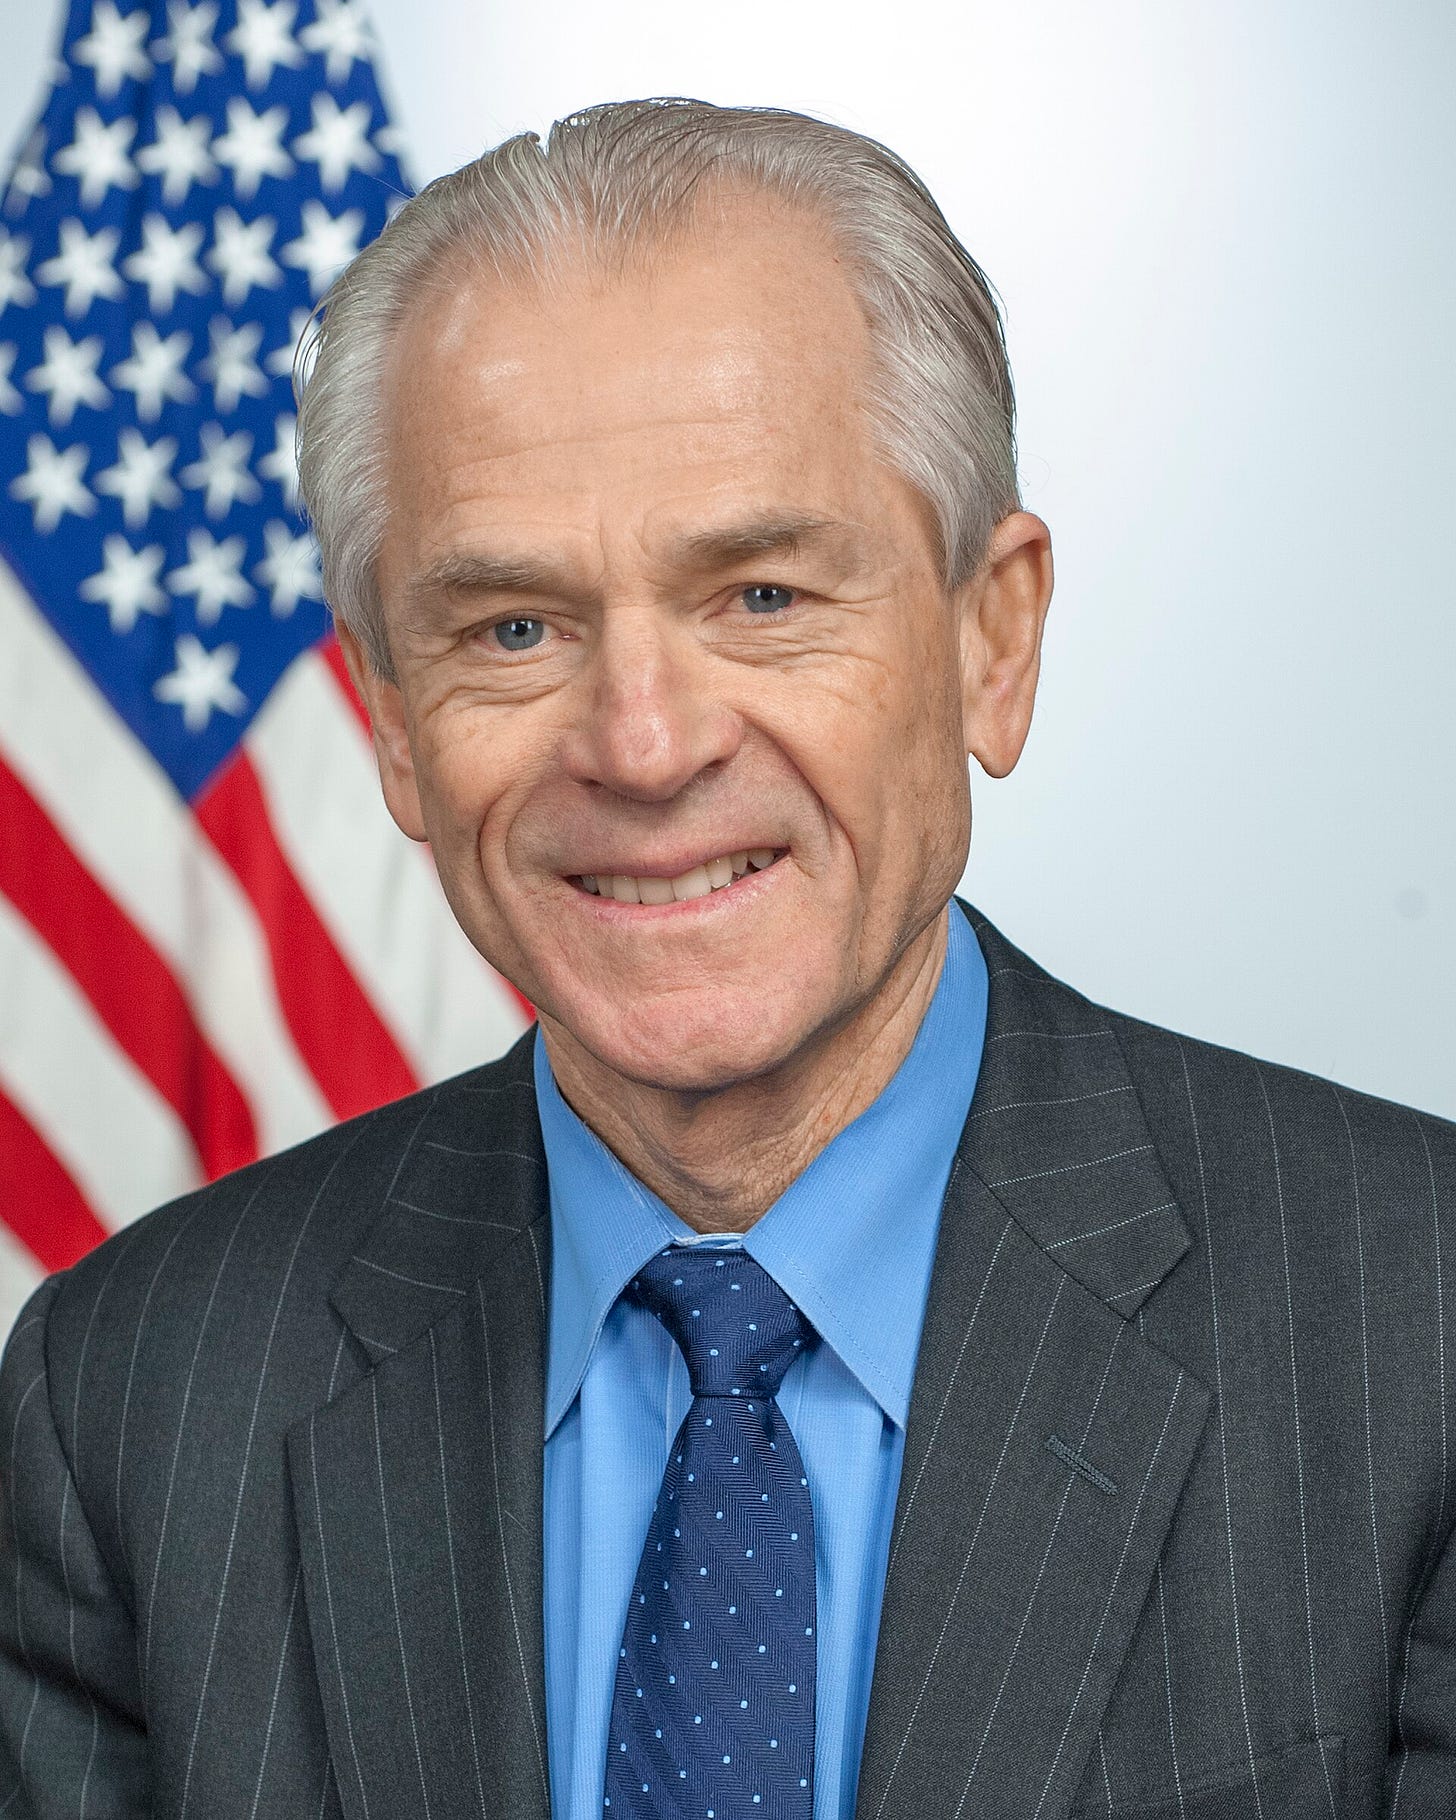 Navarro smiling, seated in front of an American flag